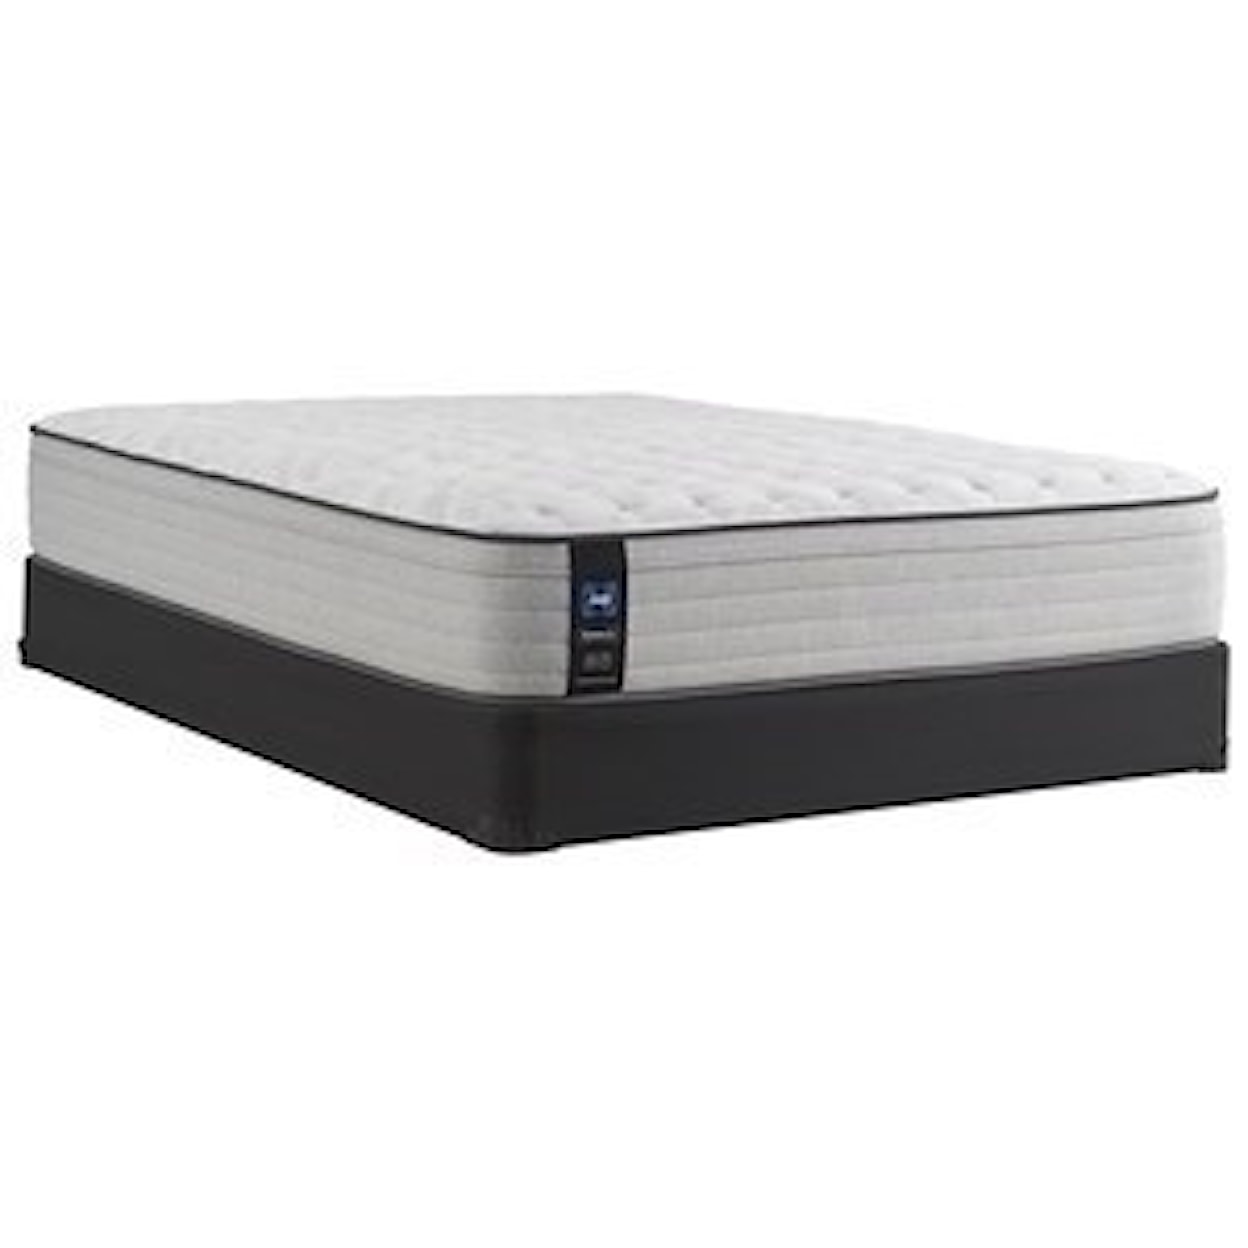 Sealy PPS3 Posturpedic Innerspring Med FXET Twin XL 13" Medium Faux Euro Top Set